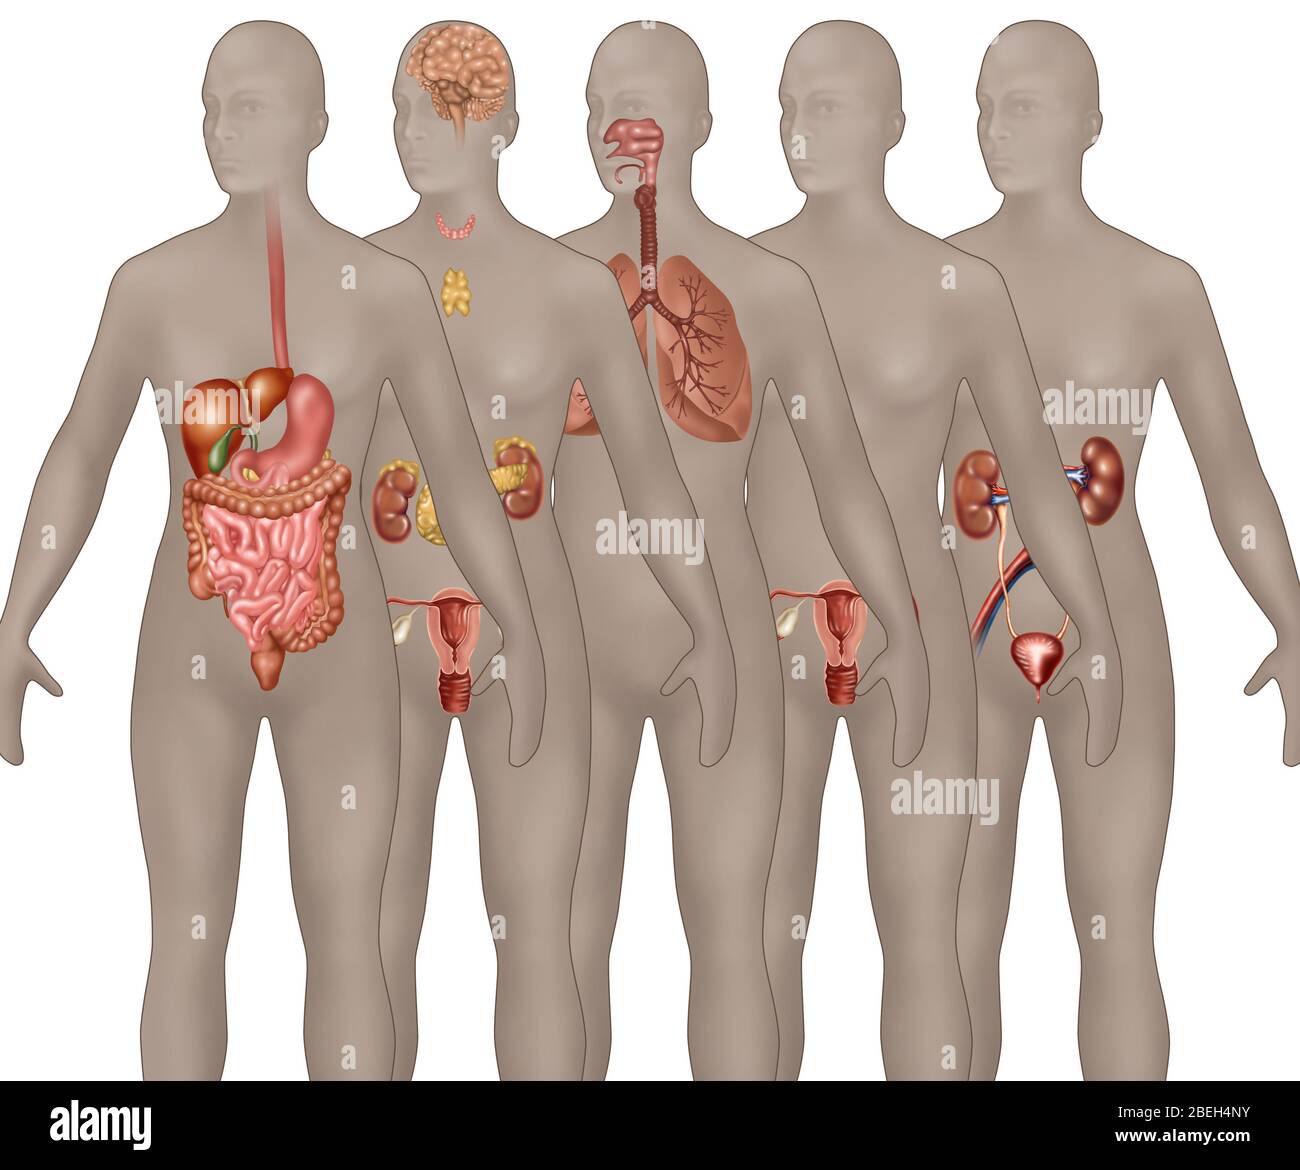 Organ systems illustrated in female anatomy. From foreground to background depicted are: digestive system, endocrine system, respiratory system, male reproductive system, and urinary system. Stock Photo